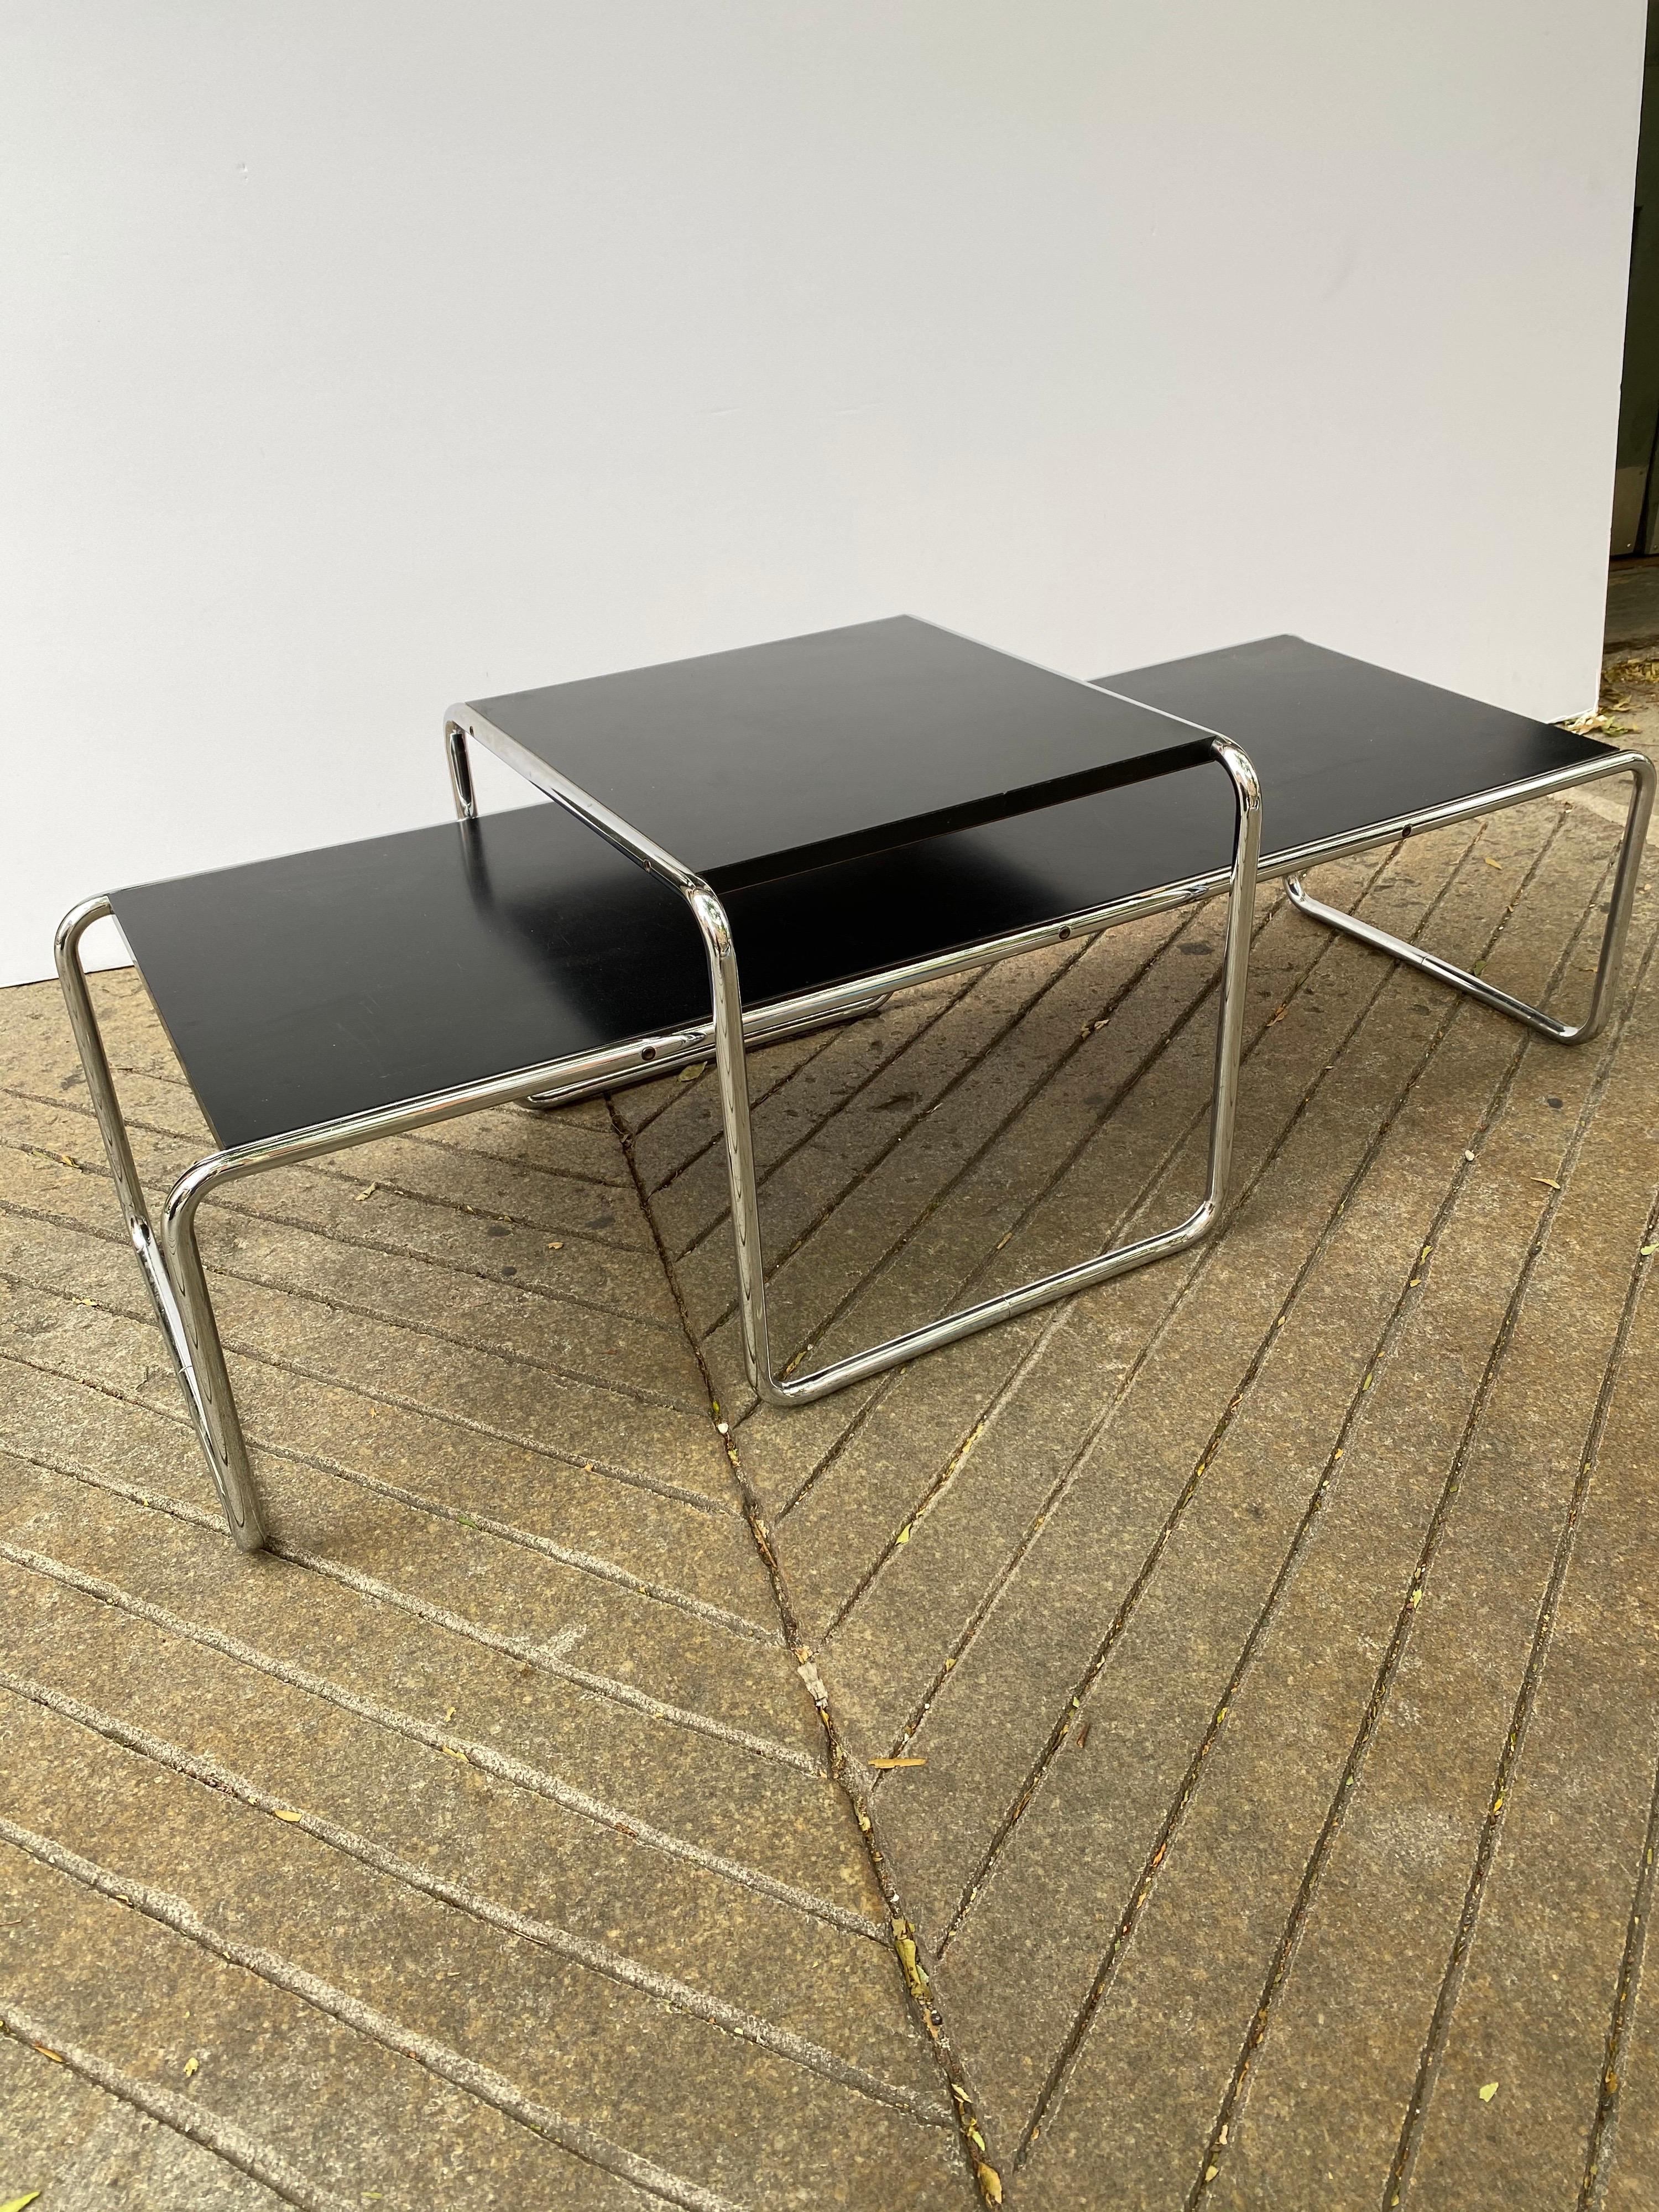 Marcel Breuer Laccio tables, one longer coffee table model and the Nesting Companion Table. Classic Early Tubular Design that functions and fits into many spaces! Small Table Measures 18.75 x 21.5 and 13.5 tall. Coffee table measurements below.